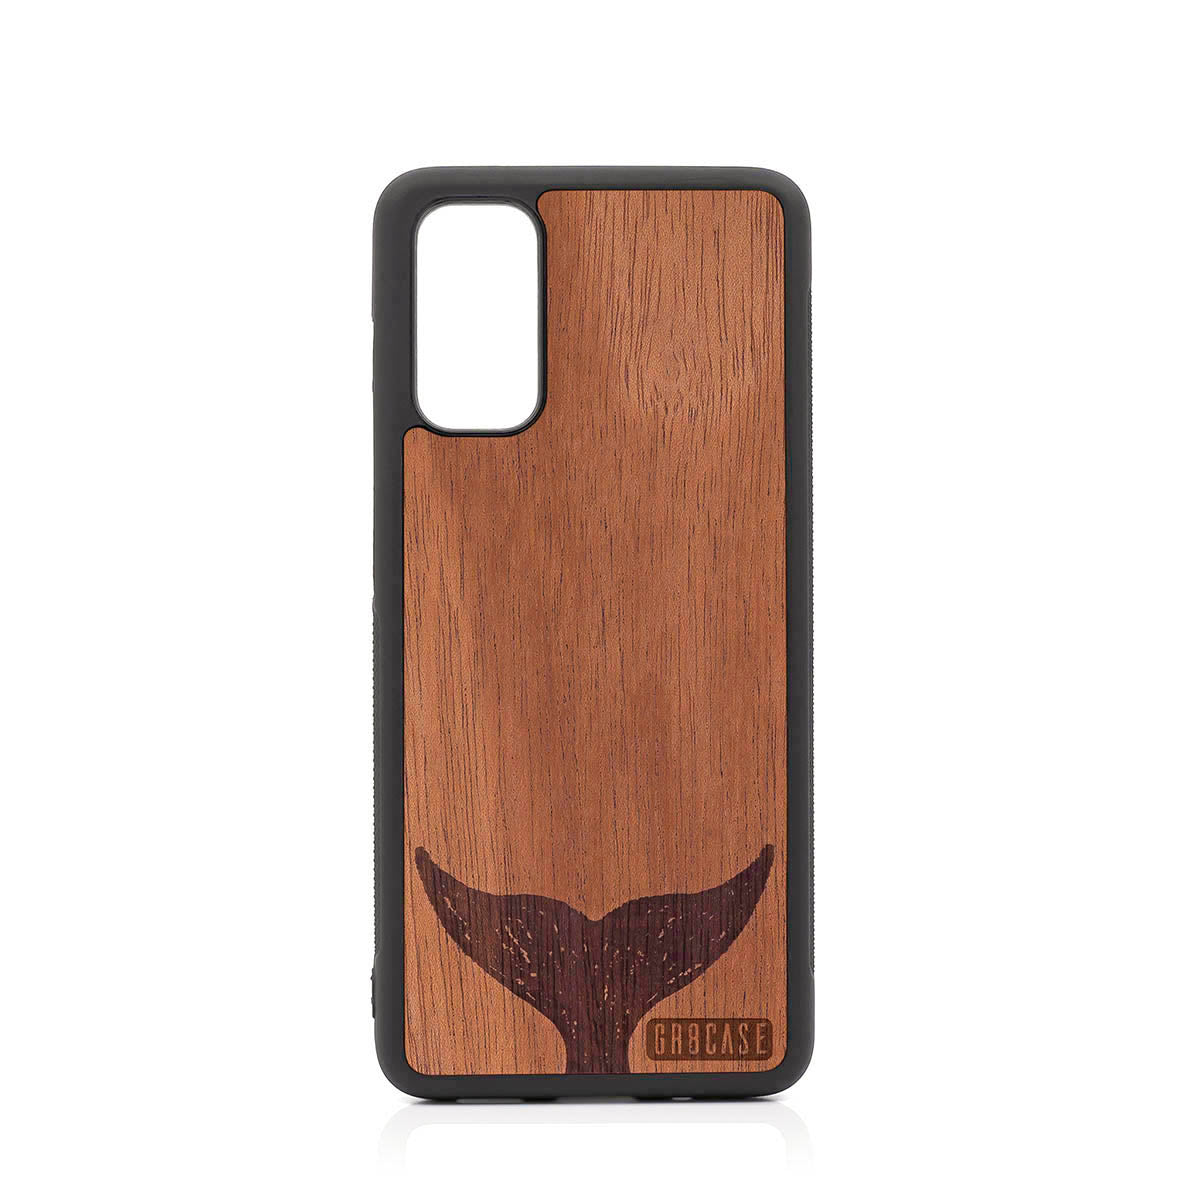 Whale Tail Design Wood Case For Samsung Galaxy S20